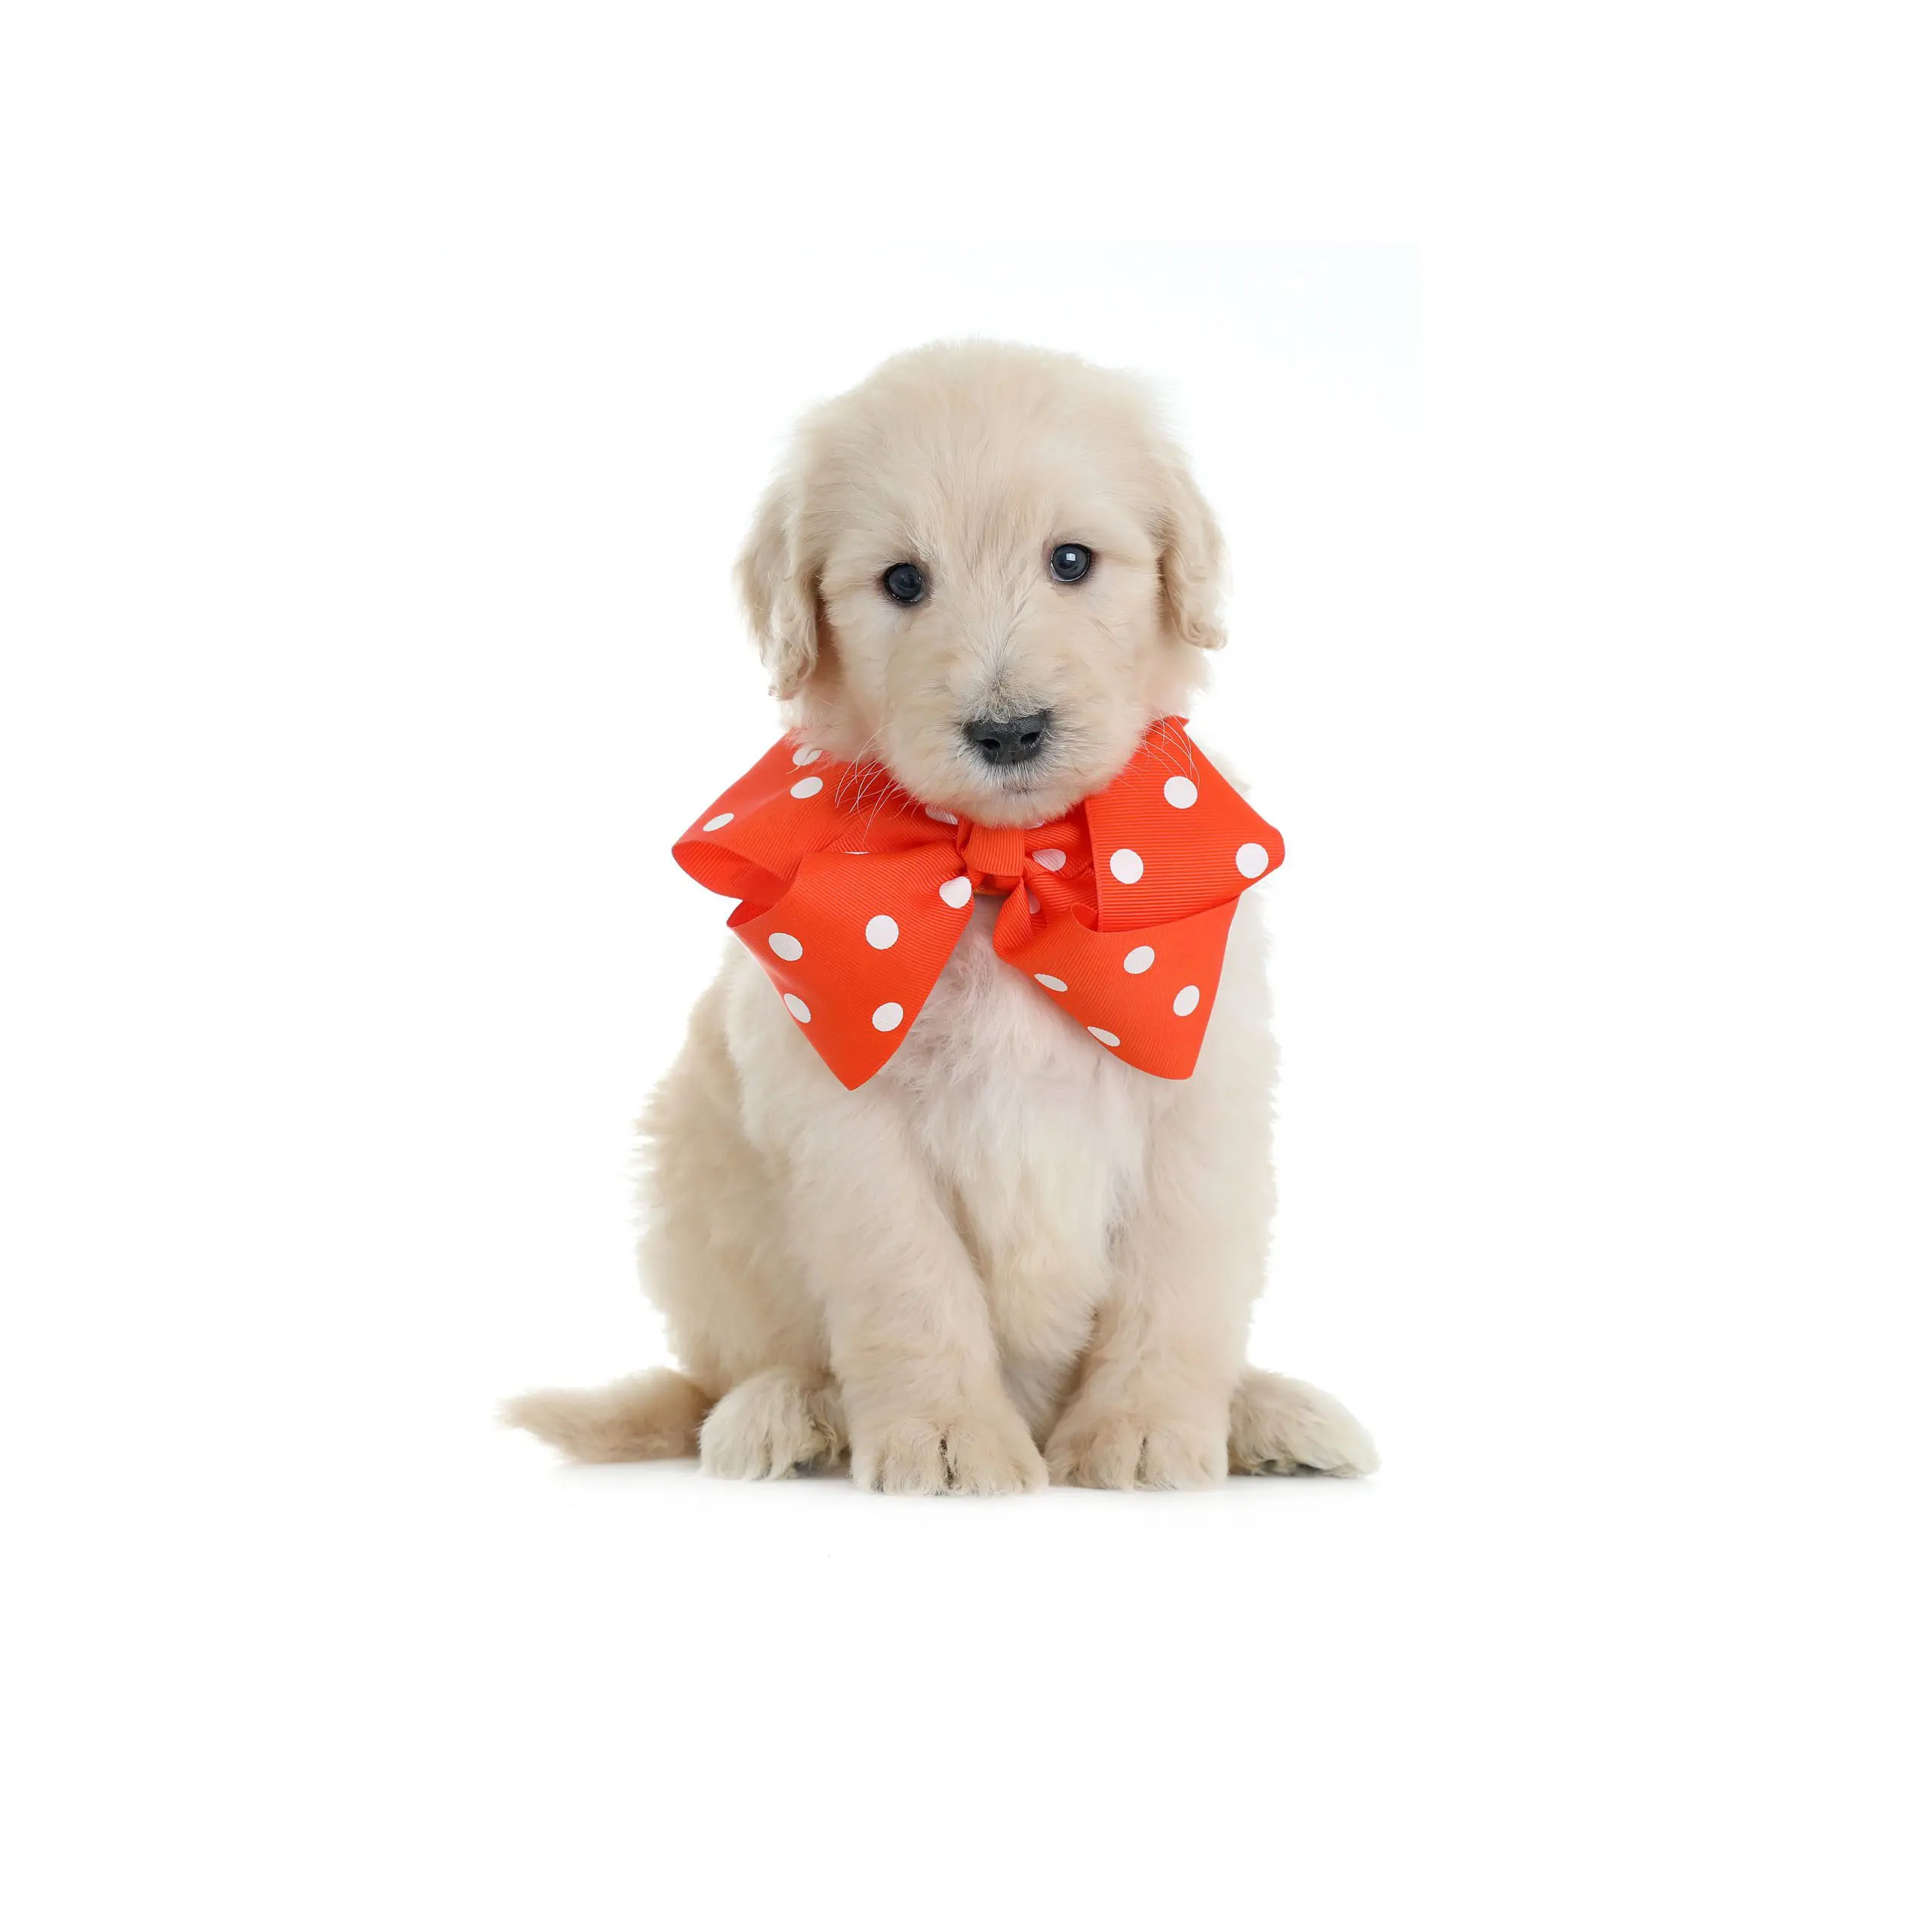 cream colored giant teddy bear schnoodle puppy in an orange polka dot bow